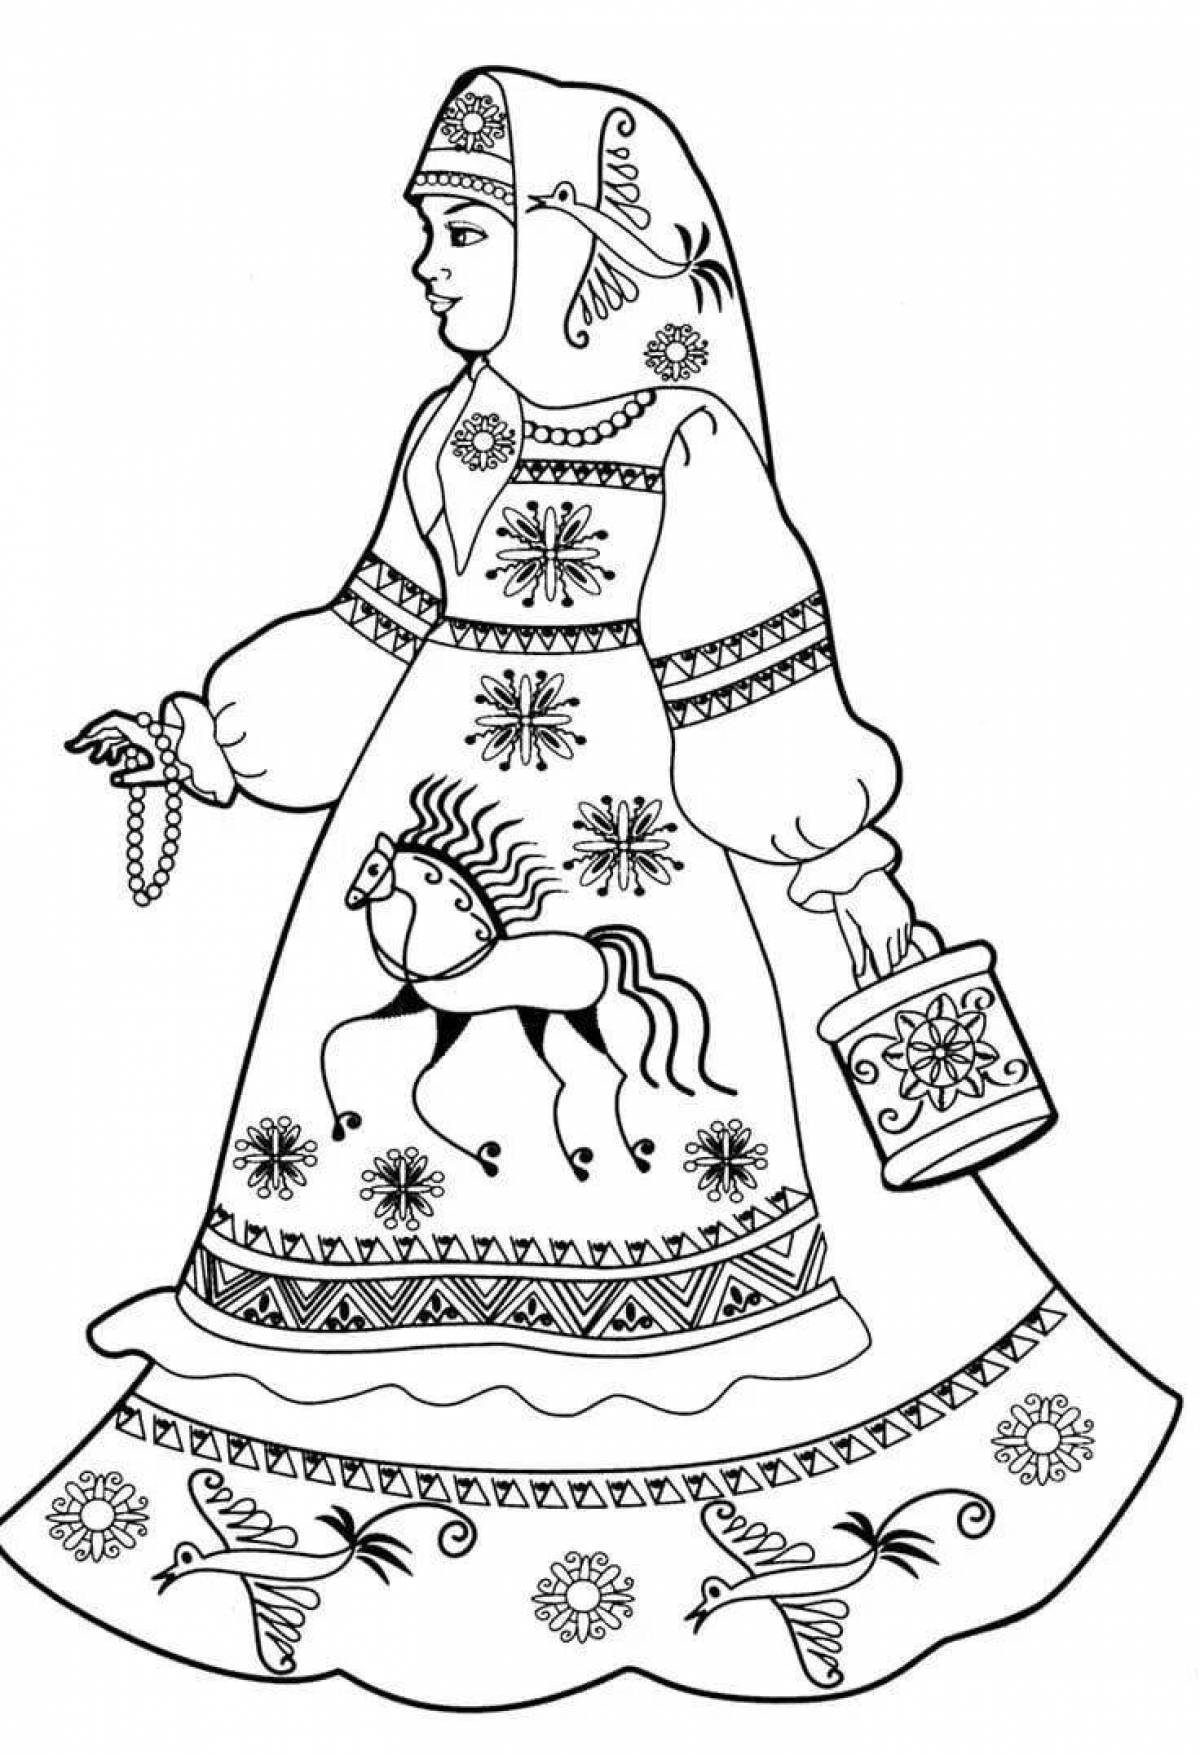 Adorable Russian costume coloring book for kids